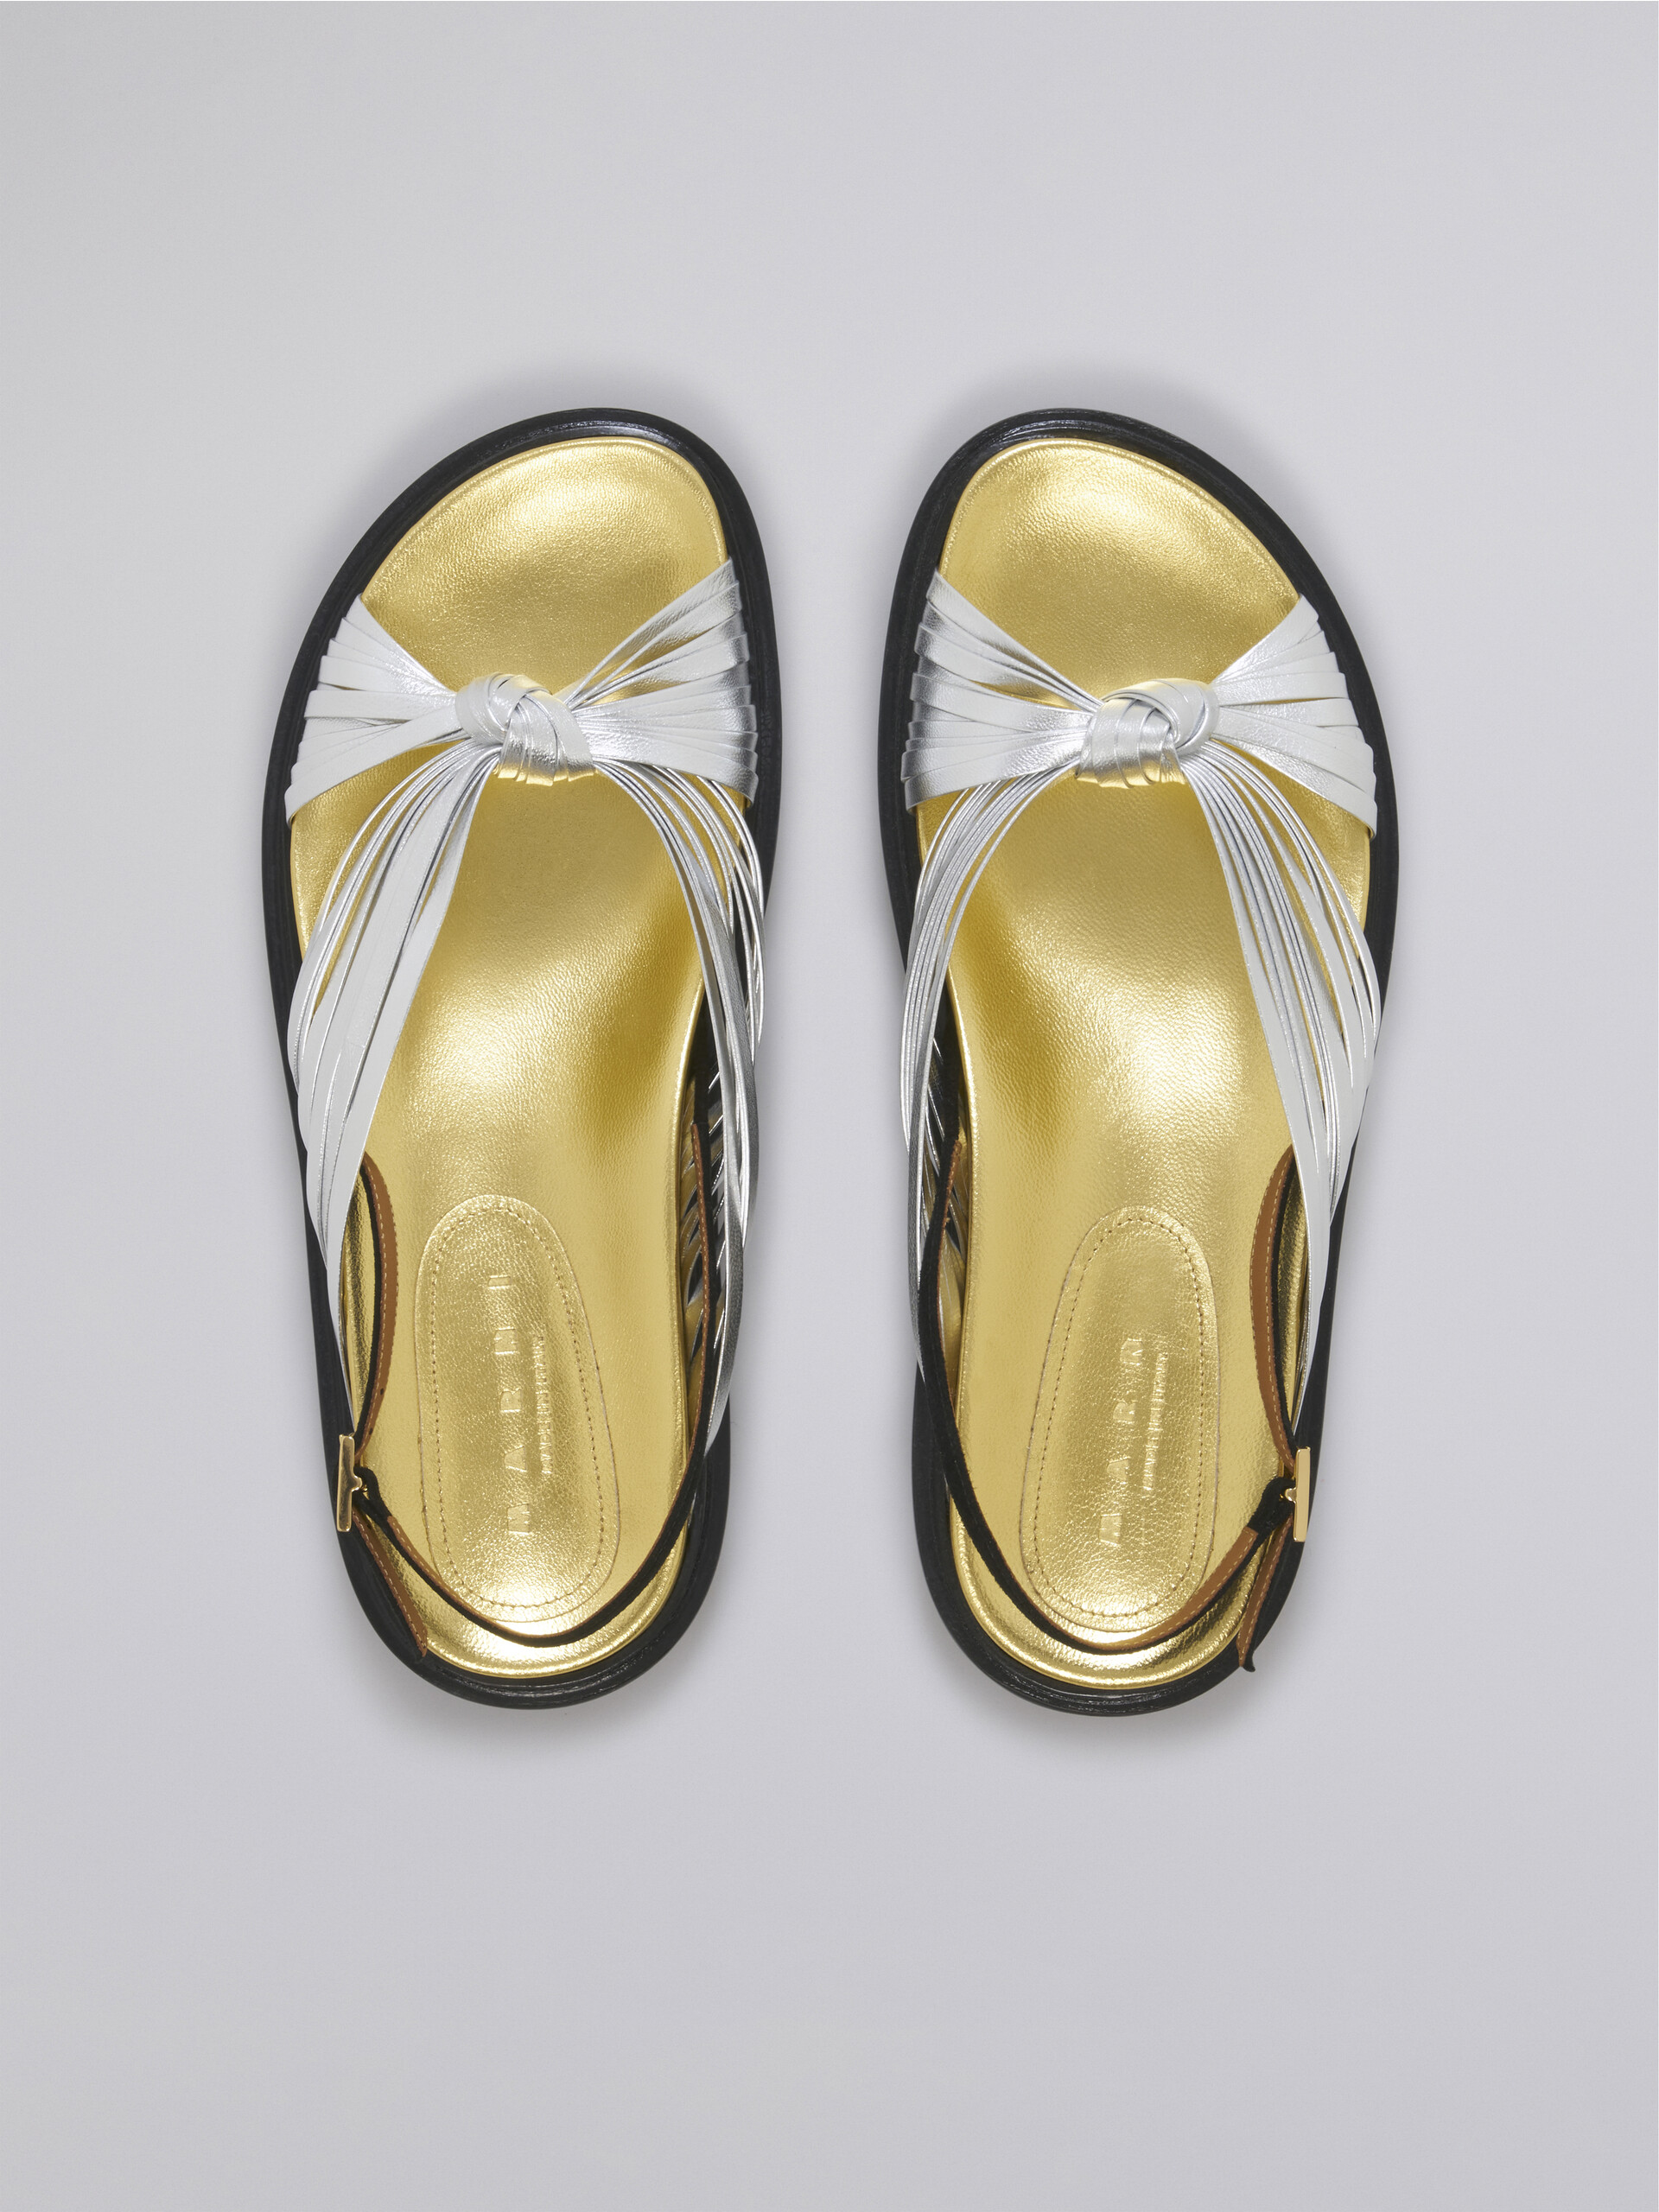 Silver laminated leather Fussbett - Sandals - Image 4